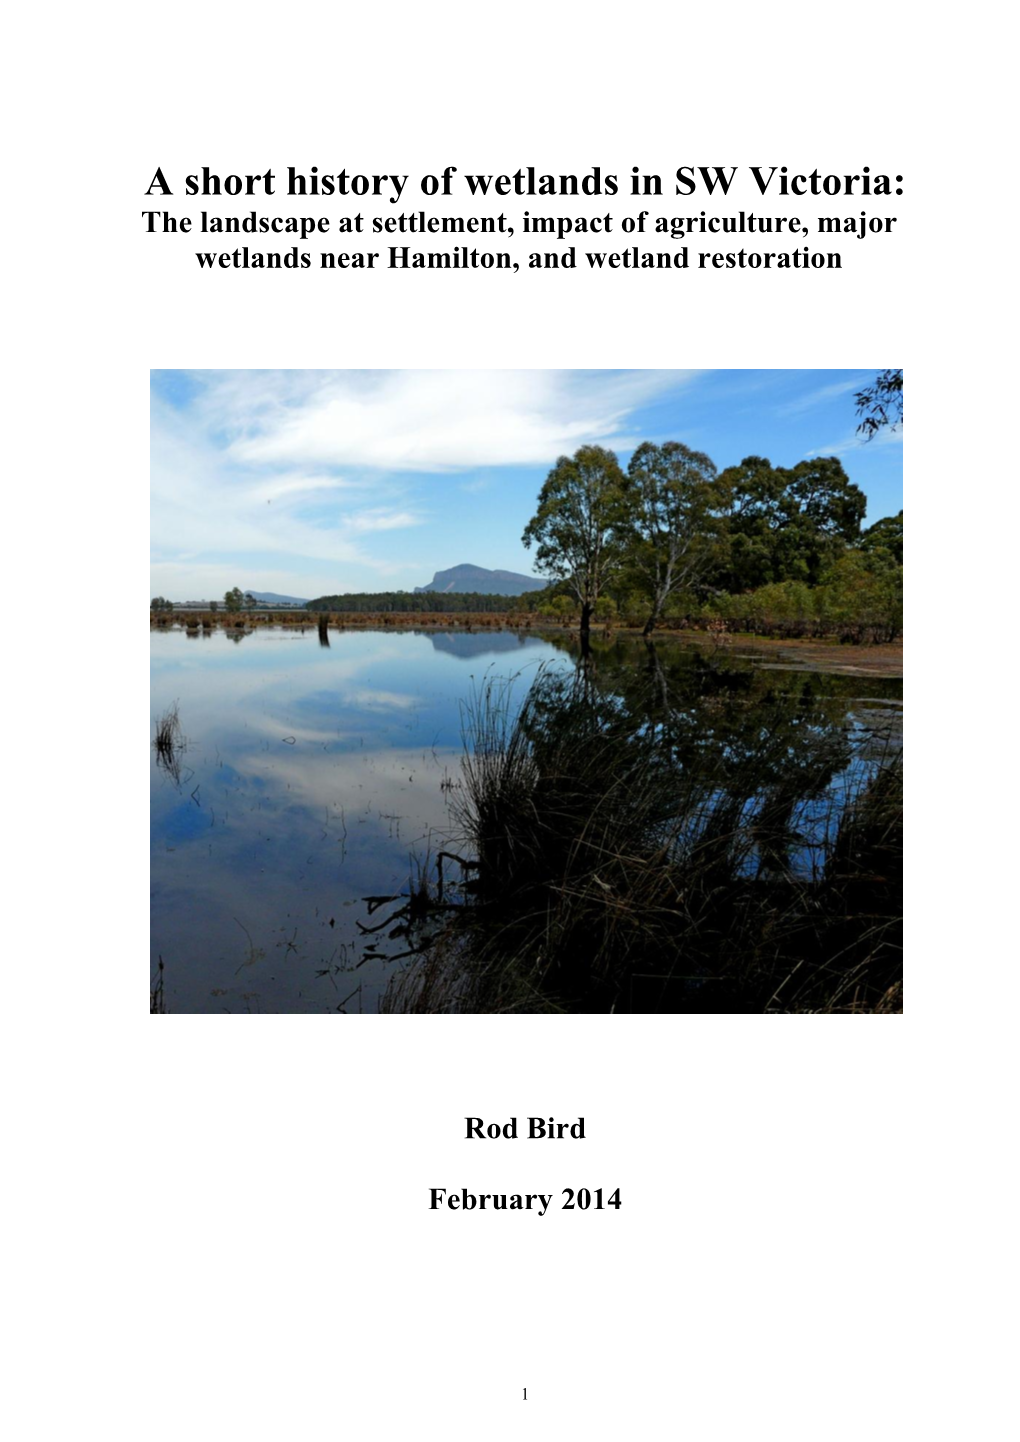 A Short History of Wetlands in SW Victoria: the Landscape at Settlement, Impact of Agriculture, Major Wetlands Near Hamilton, and Wetland Restoration